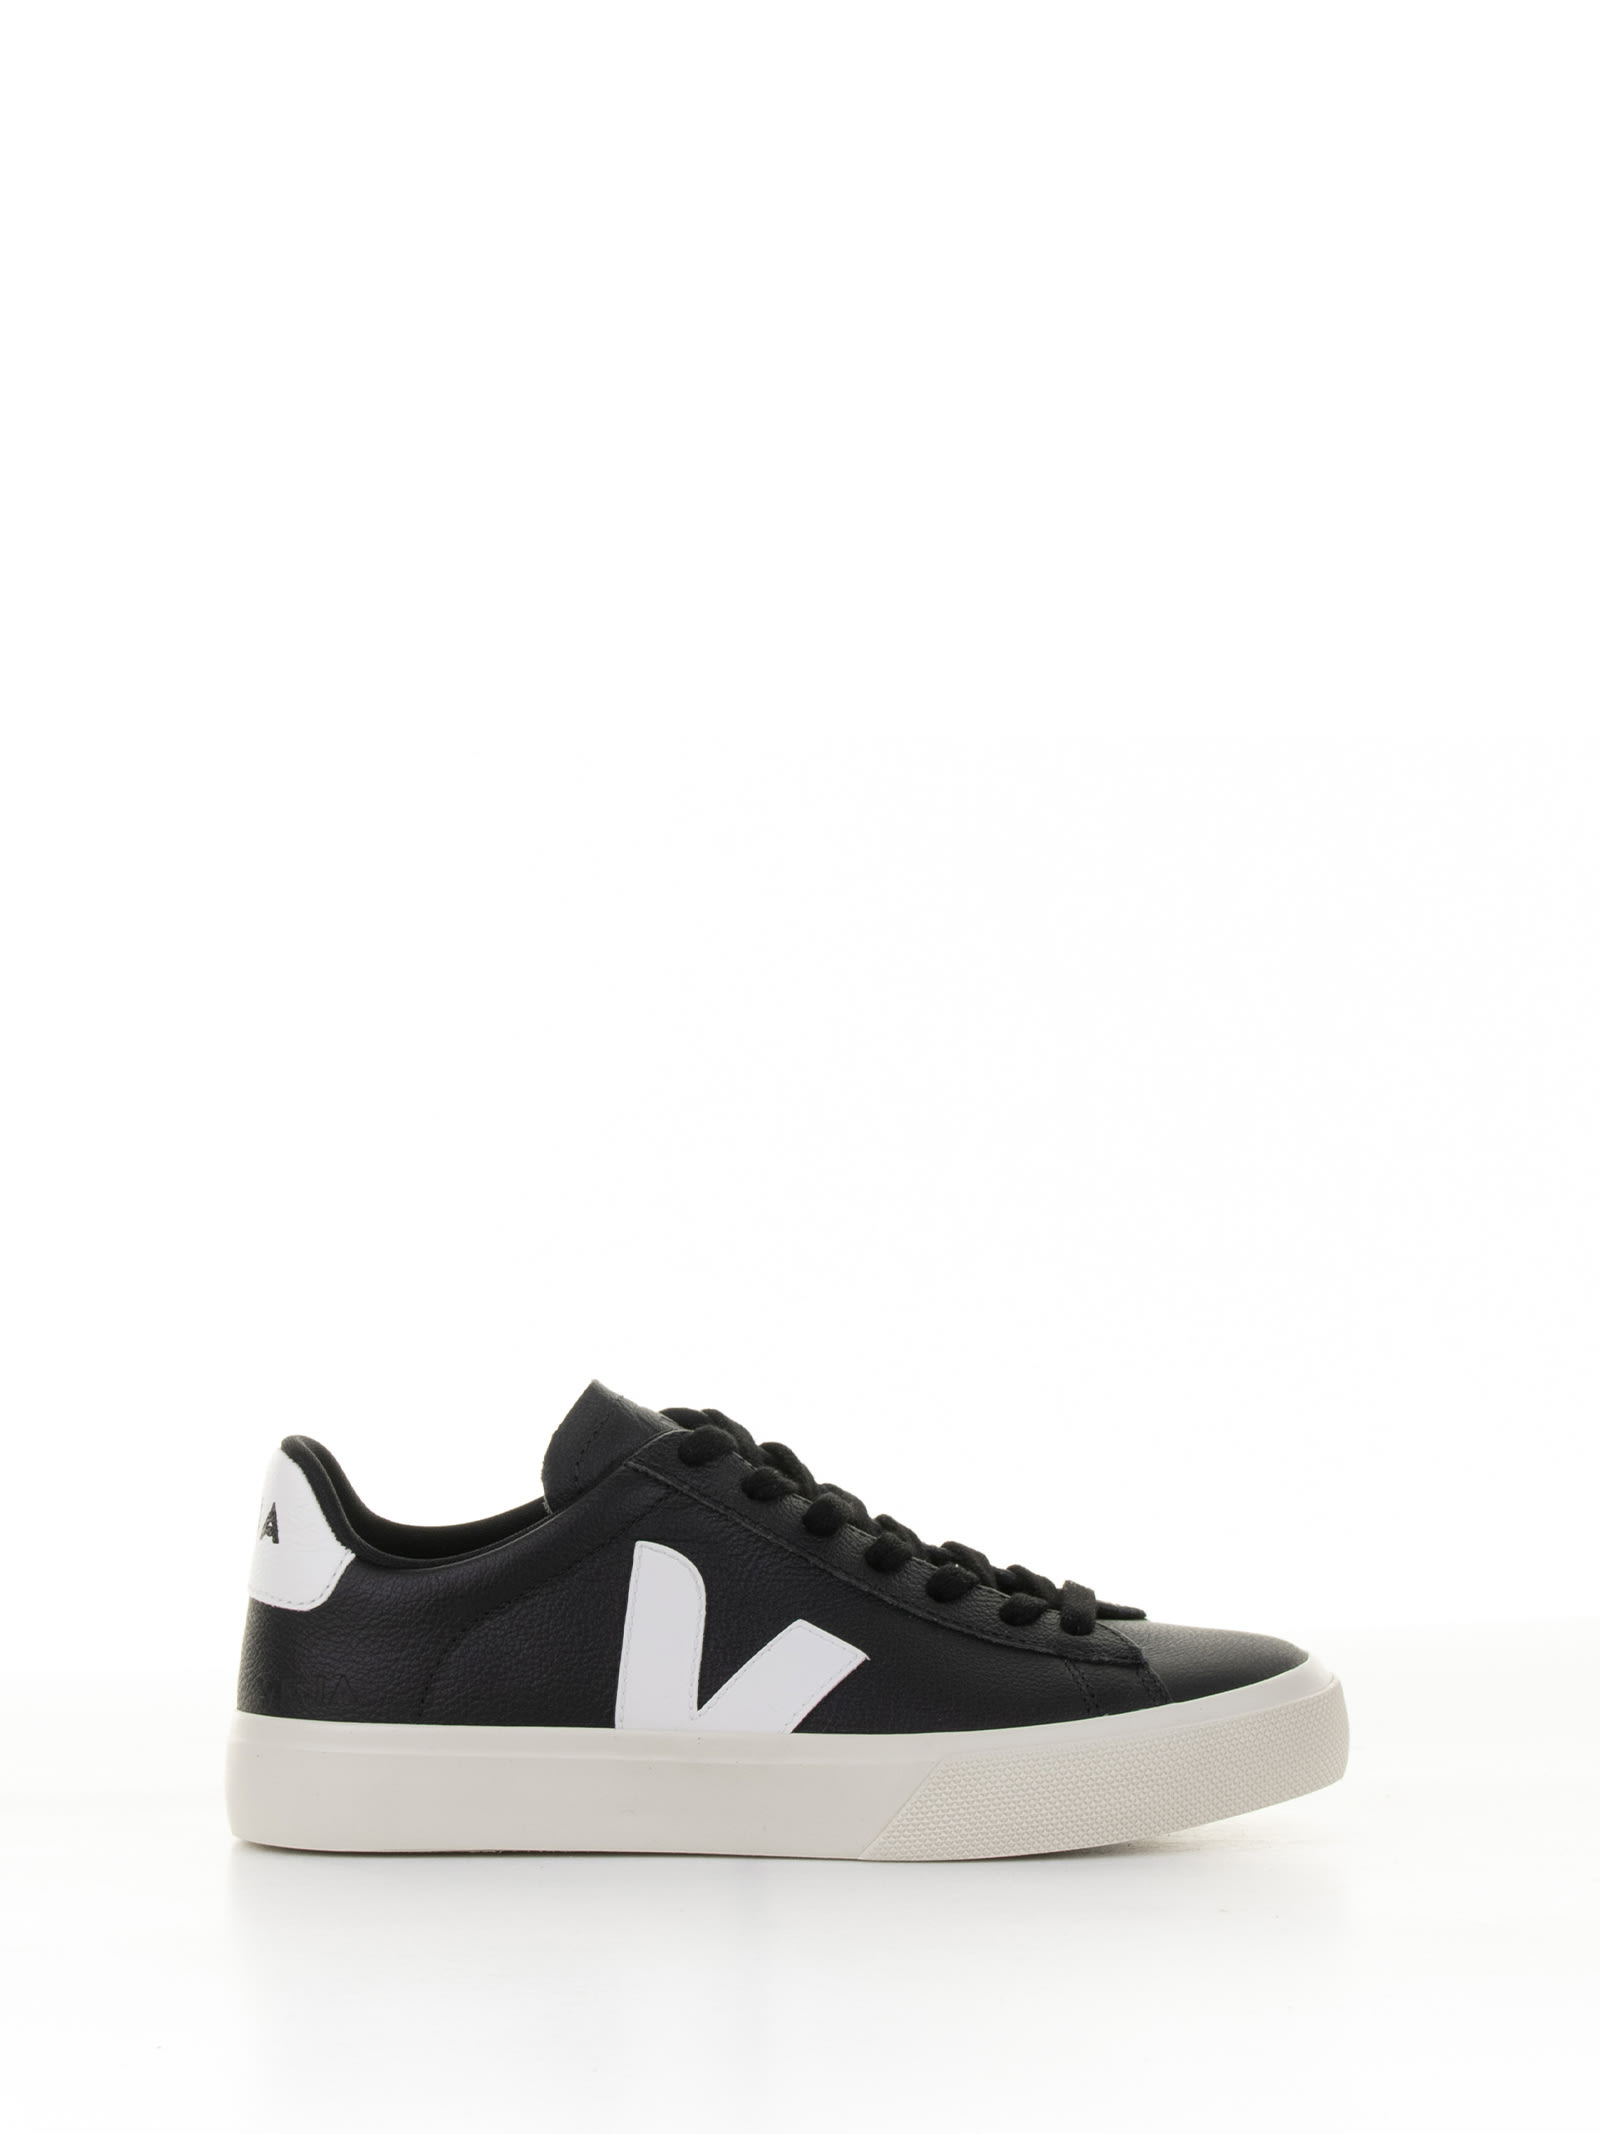 Shop Veja Campo Sneaker In Black White Leather For Women